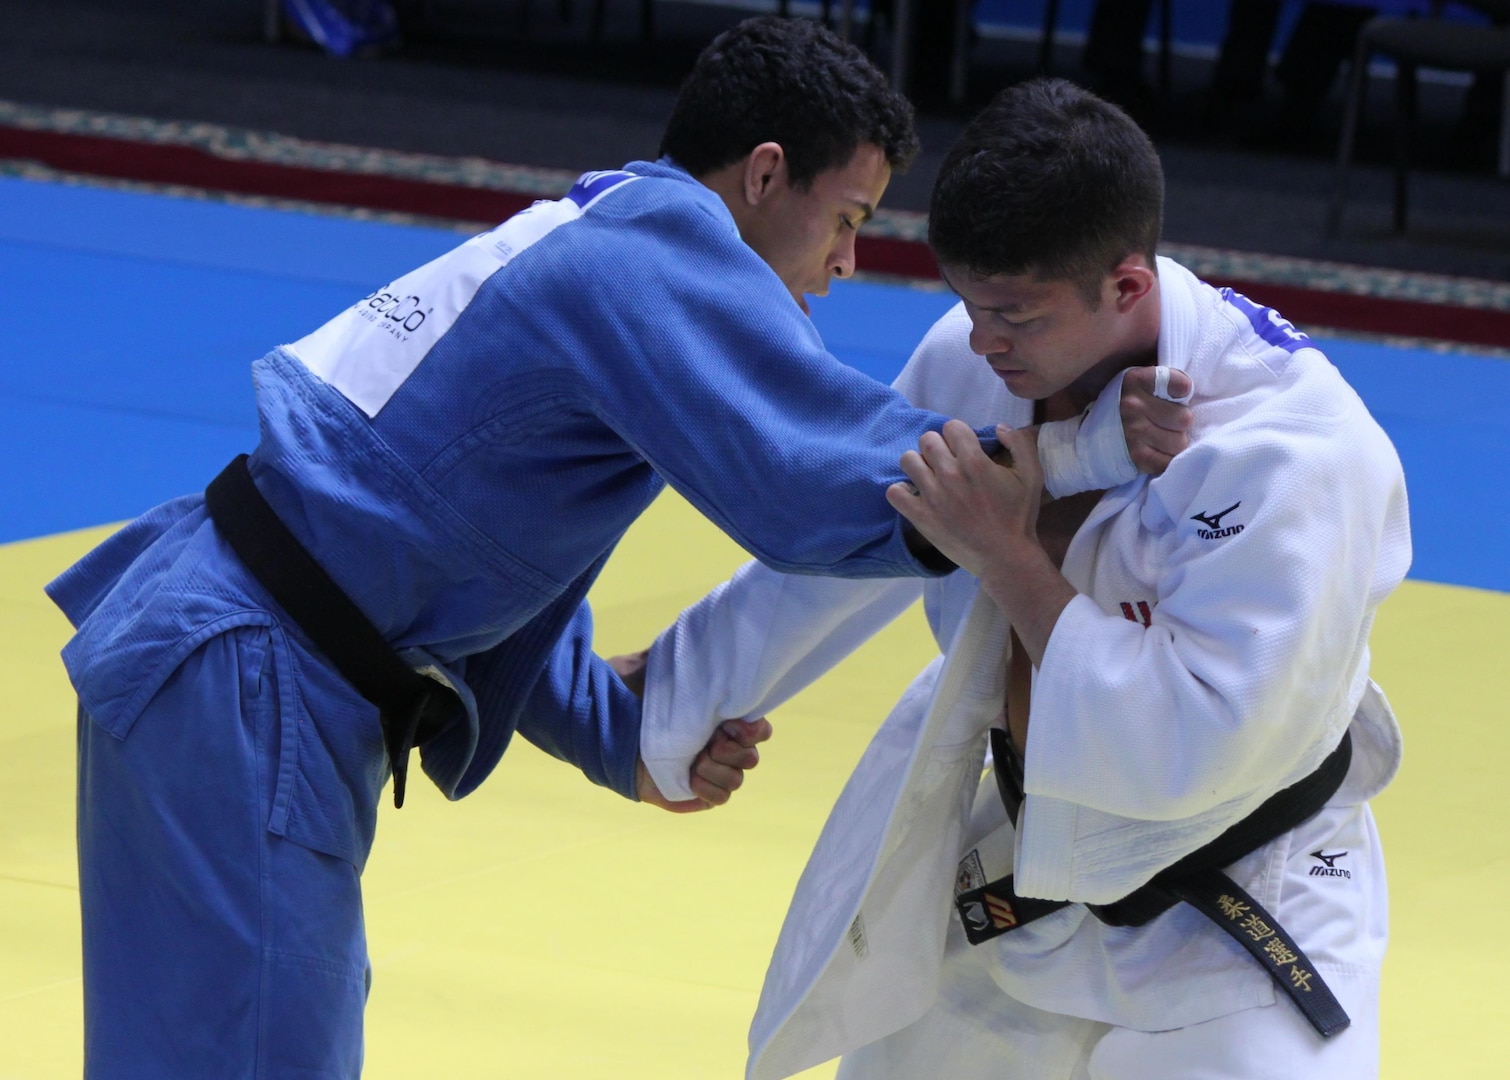 Brazilian fighter competes in world championship, Sports